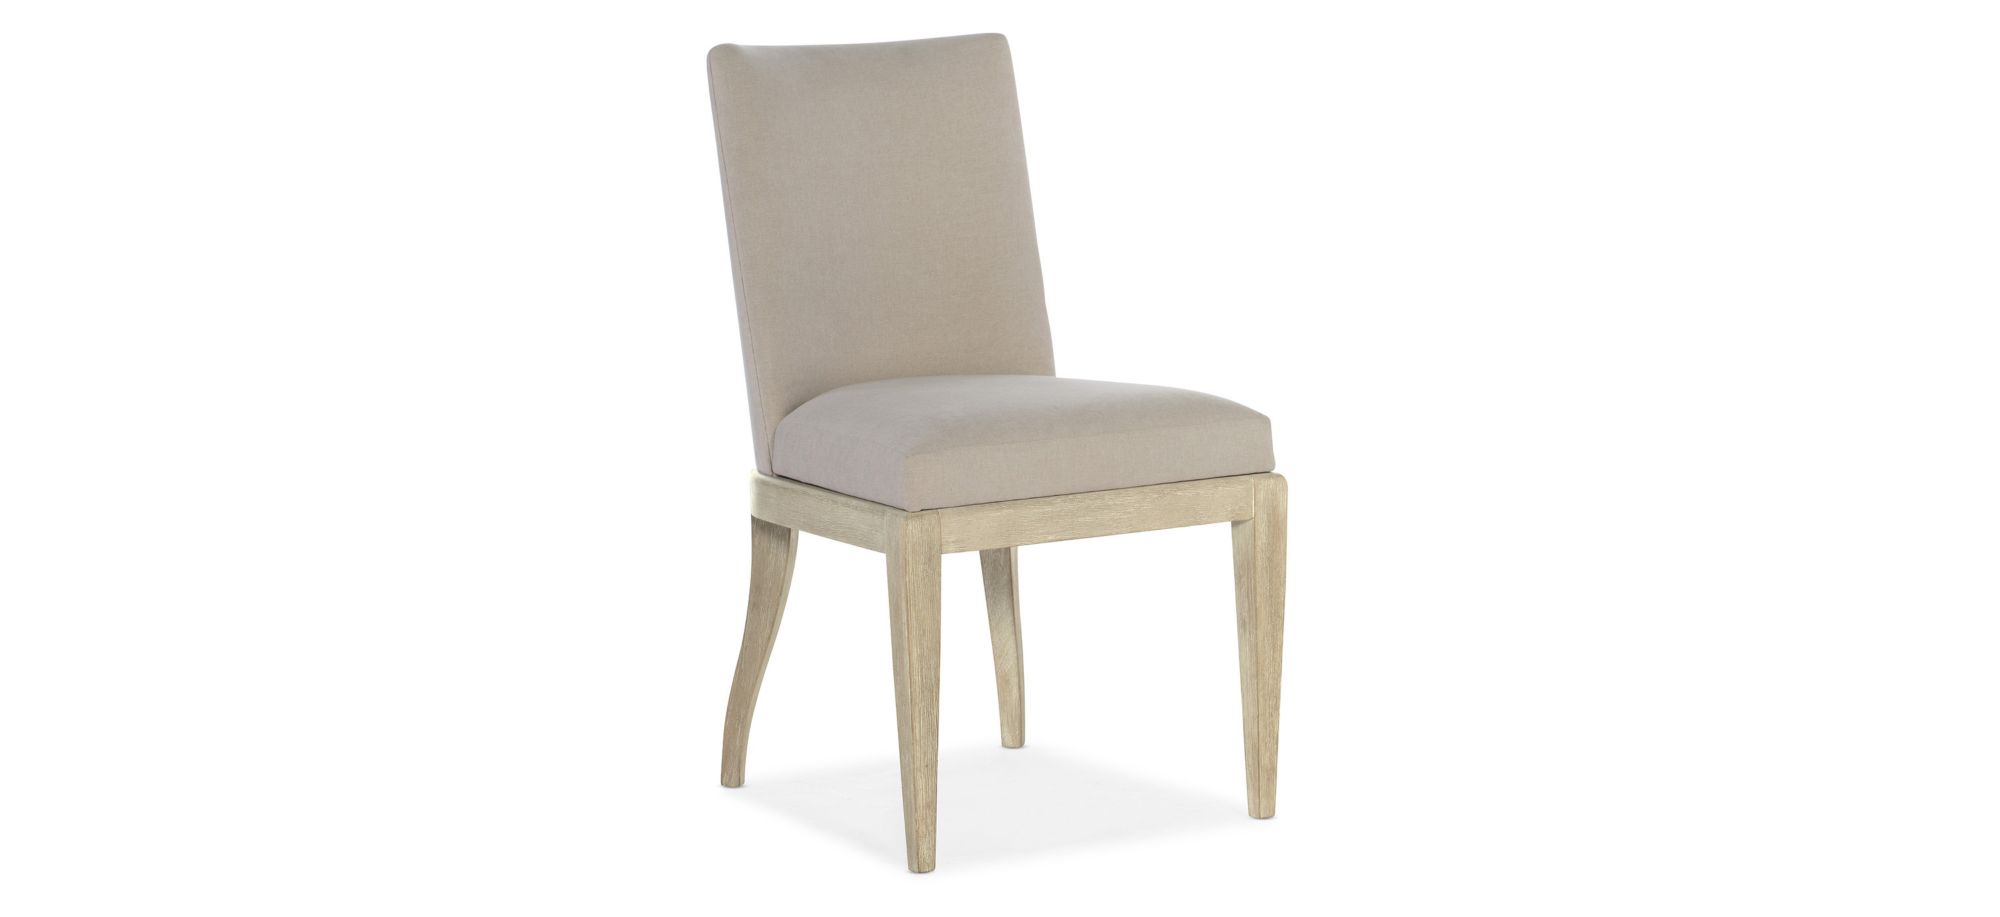 Cascade Upholstered Side Chair - Set of 2 in Terrain by Hooker Furniture